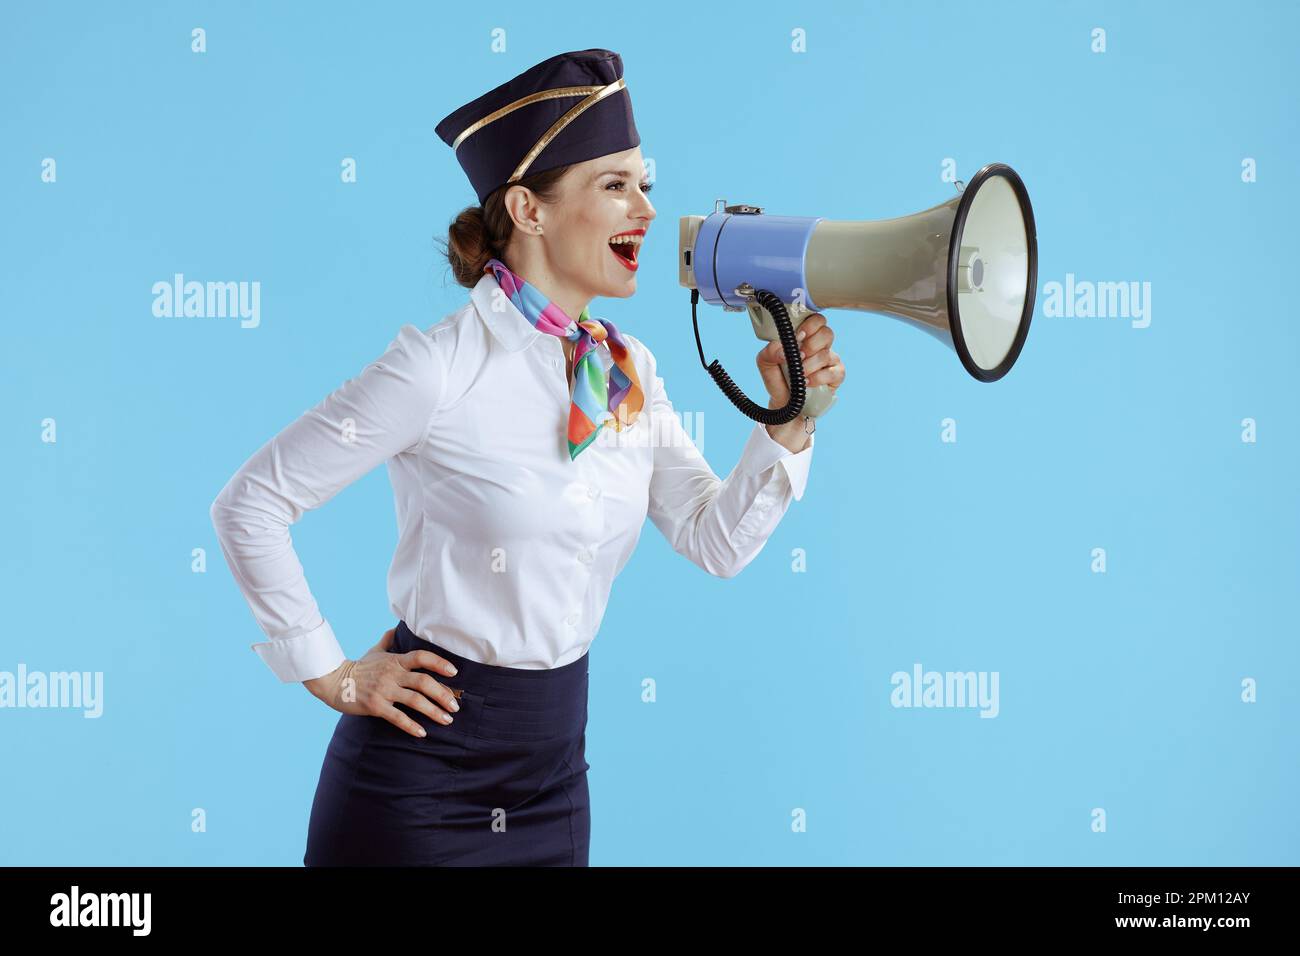 smiling elegant air hostess woman on blue background in uniform with megaphone. Stock Photo